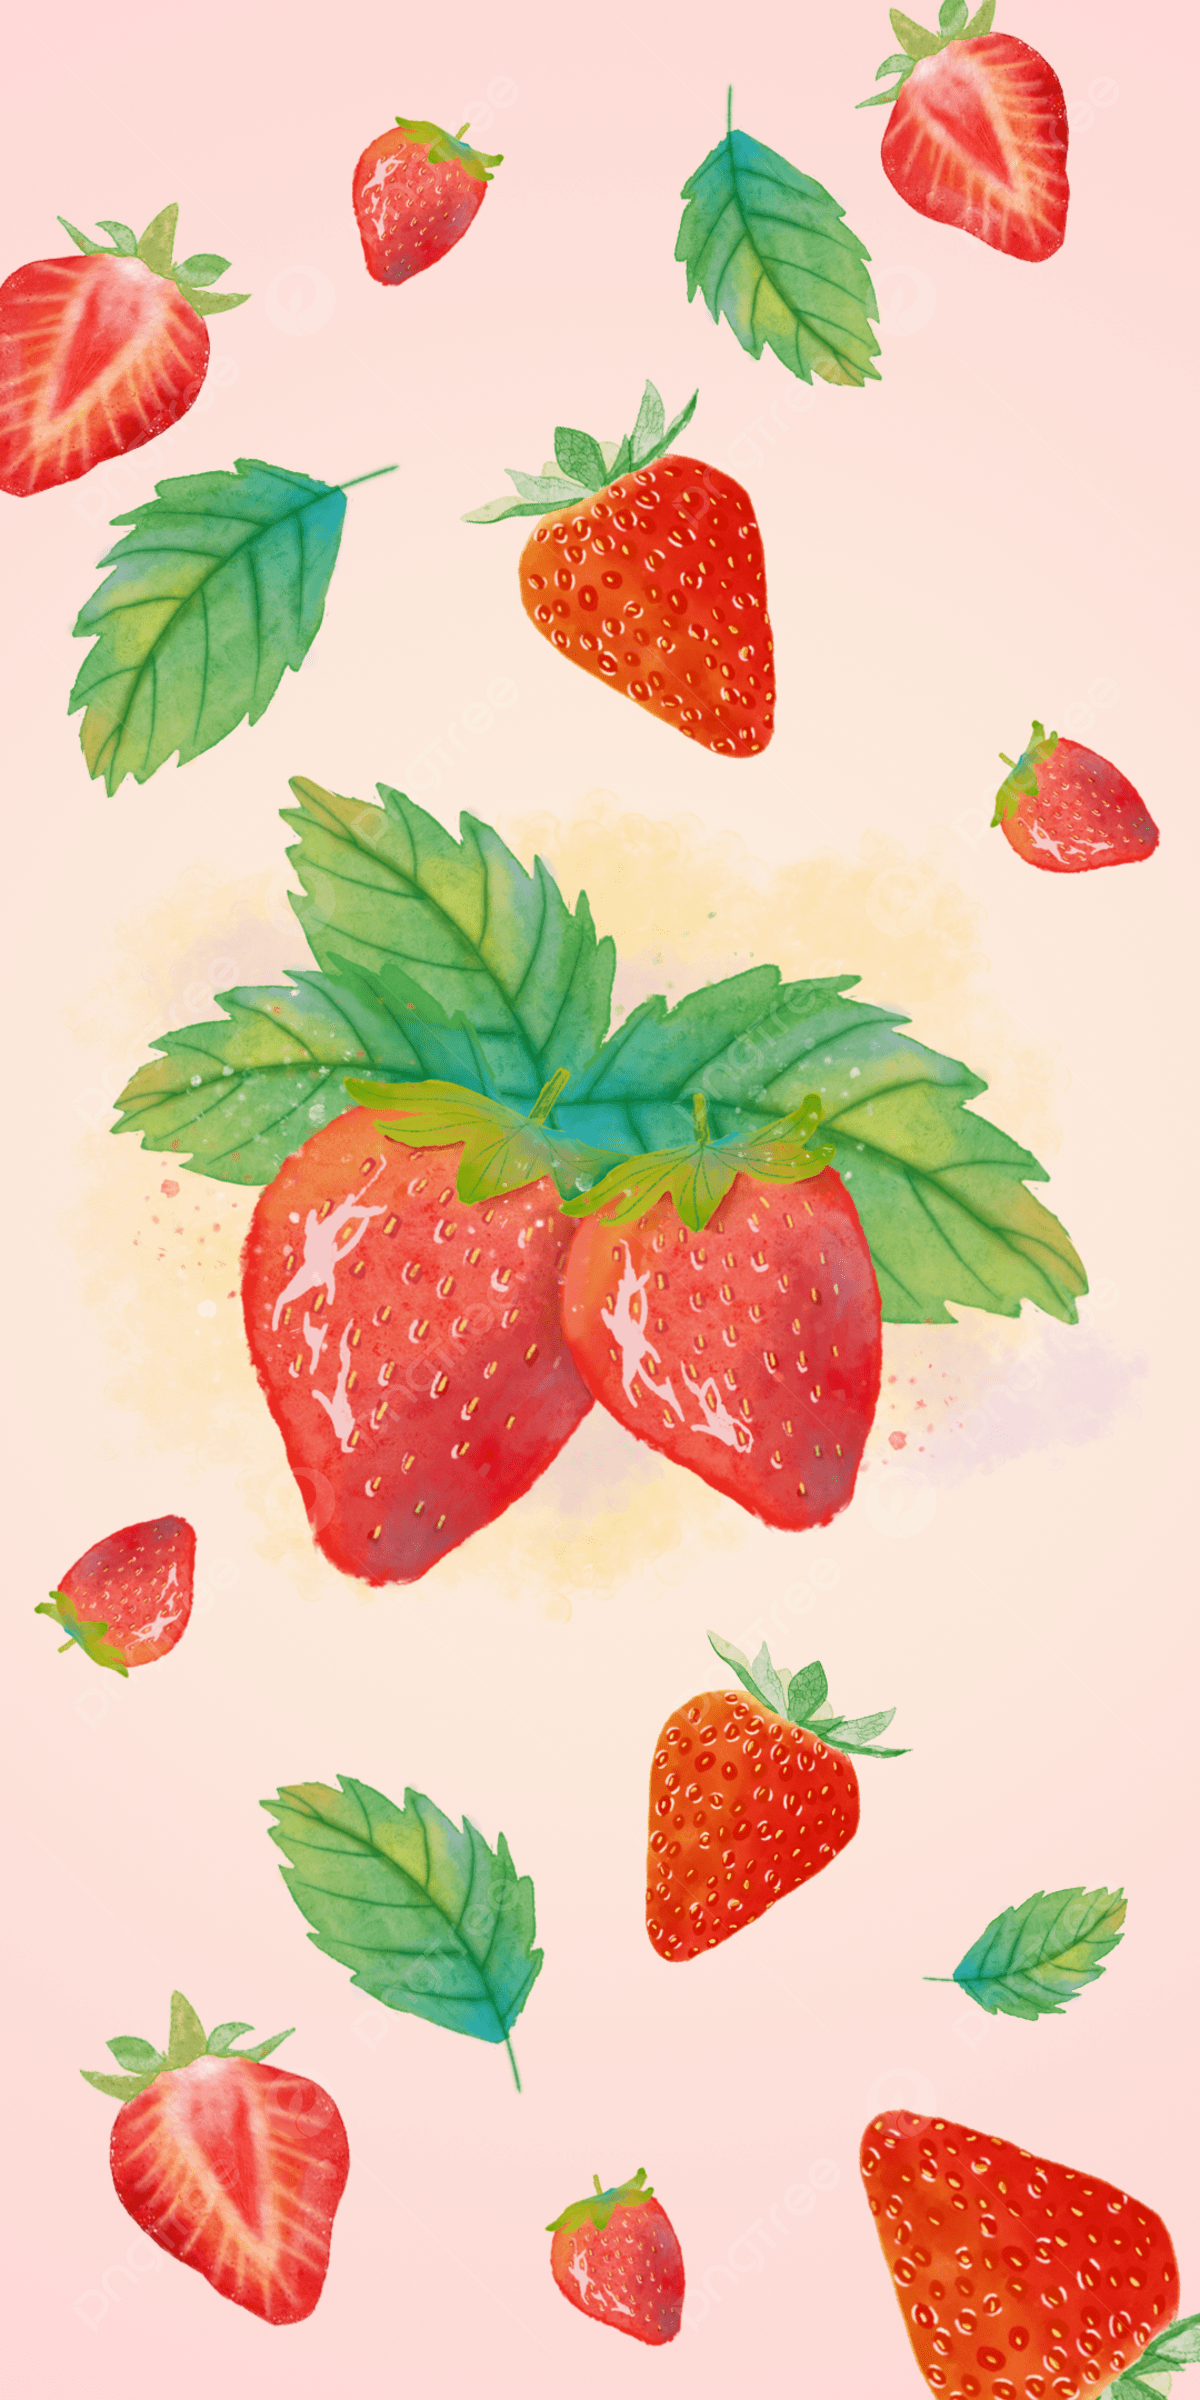 Strawberry Wallpaper Background Image, HD Picture and Wallpaper For Free Download